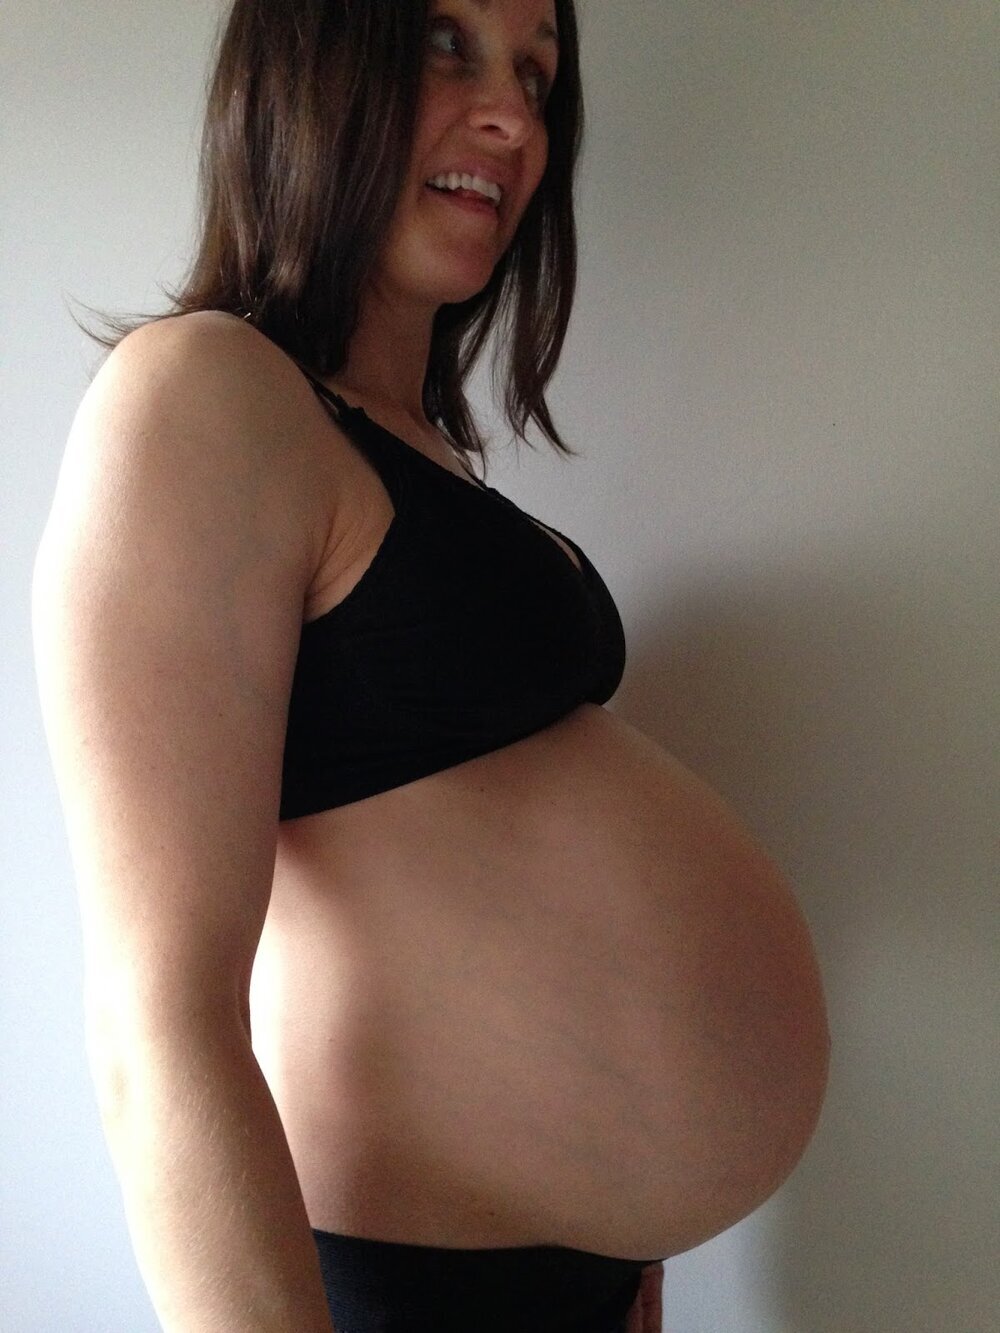 Memories of an ashtangi and her pregnancy